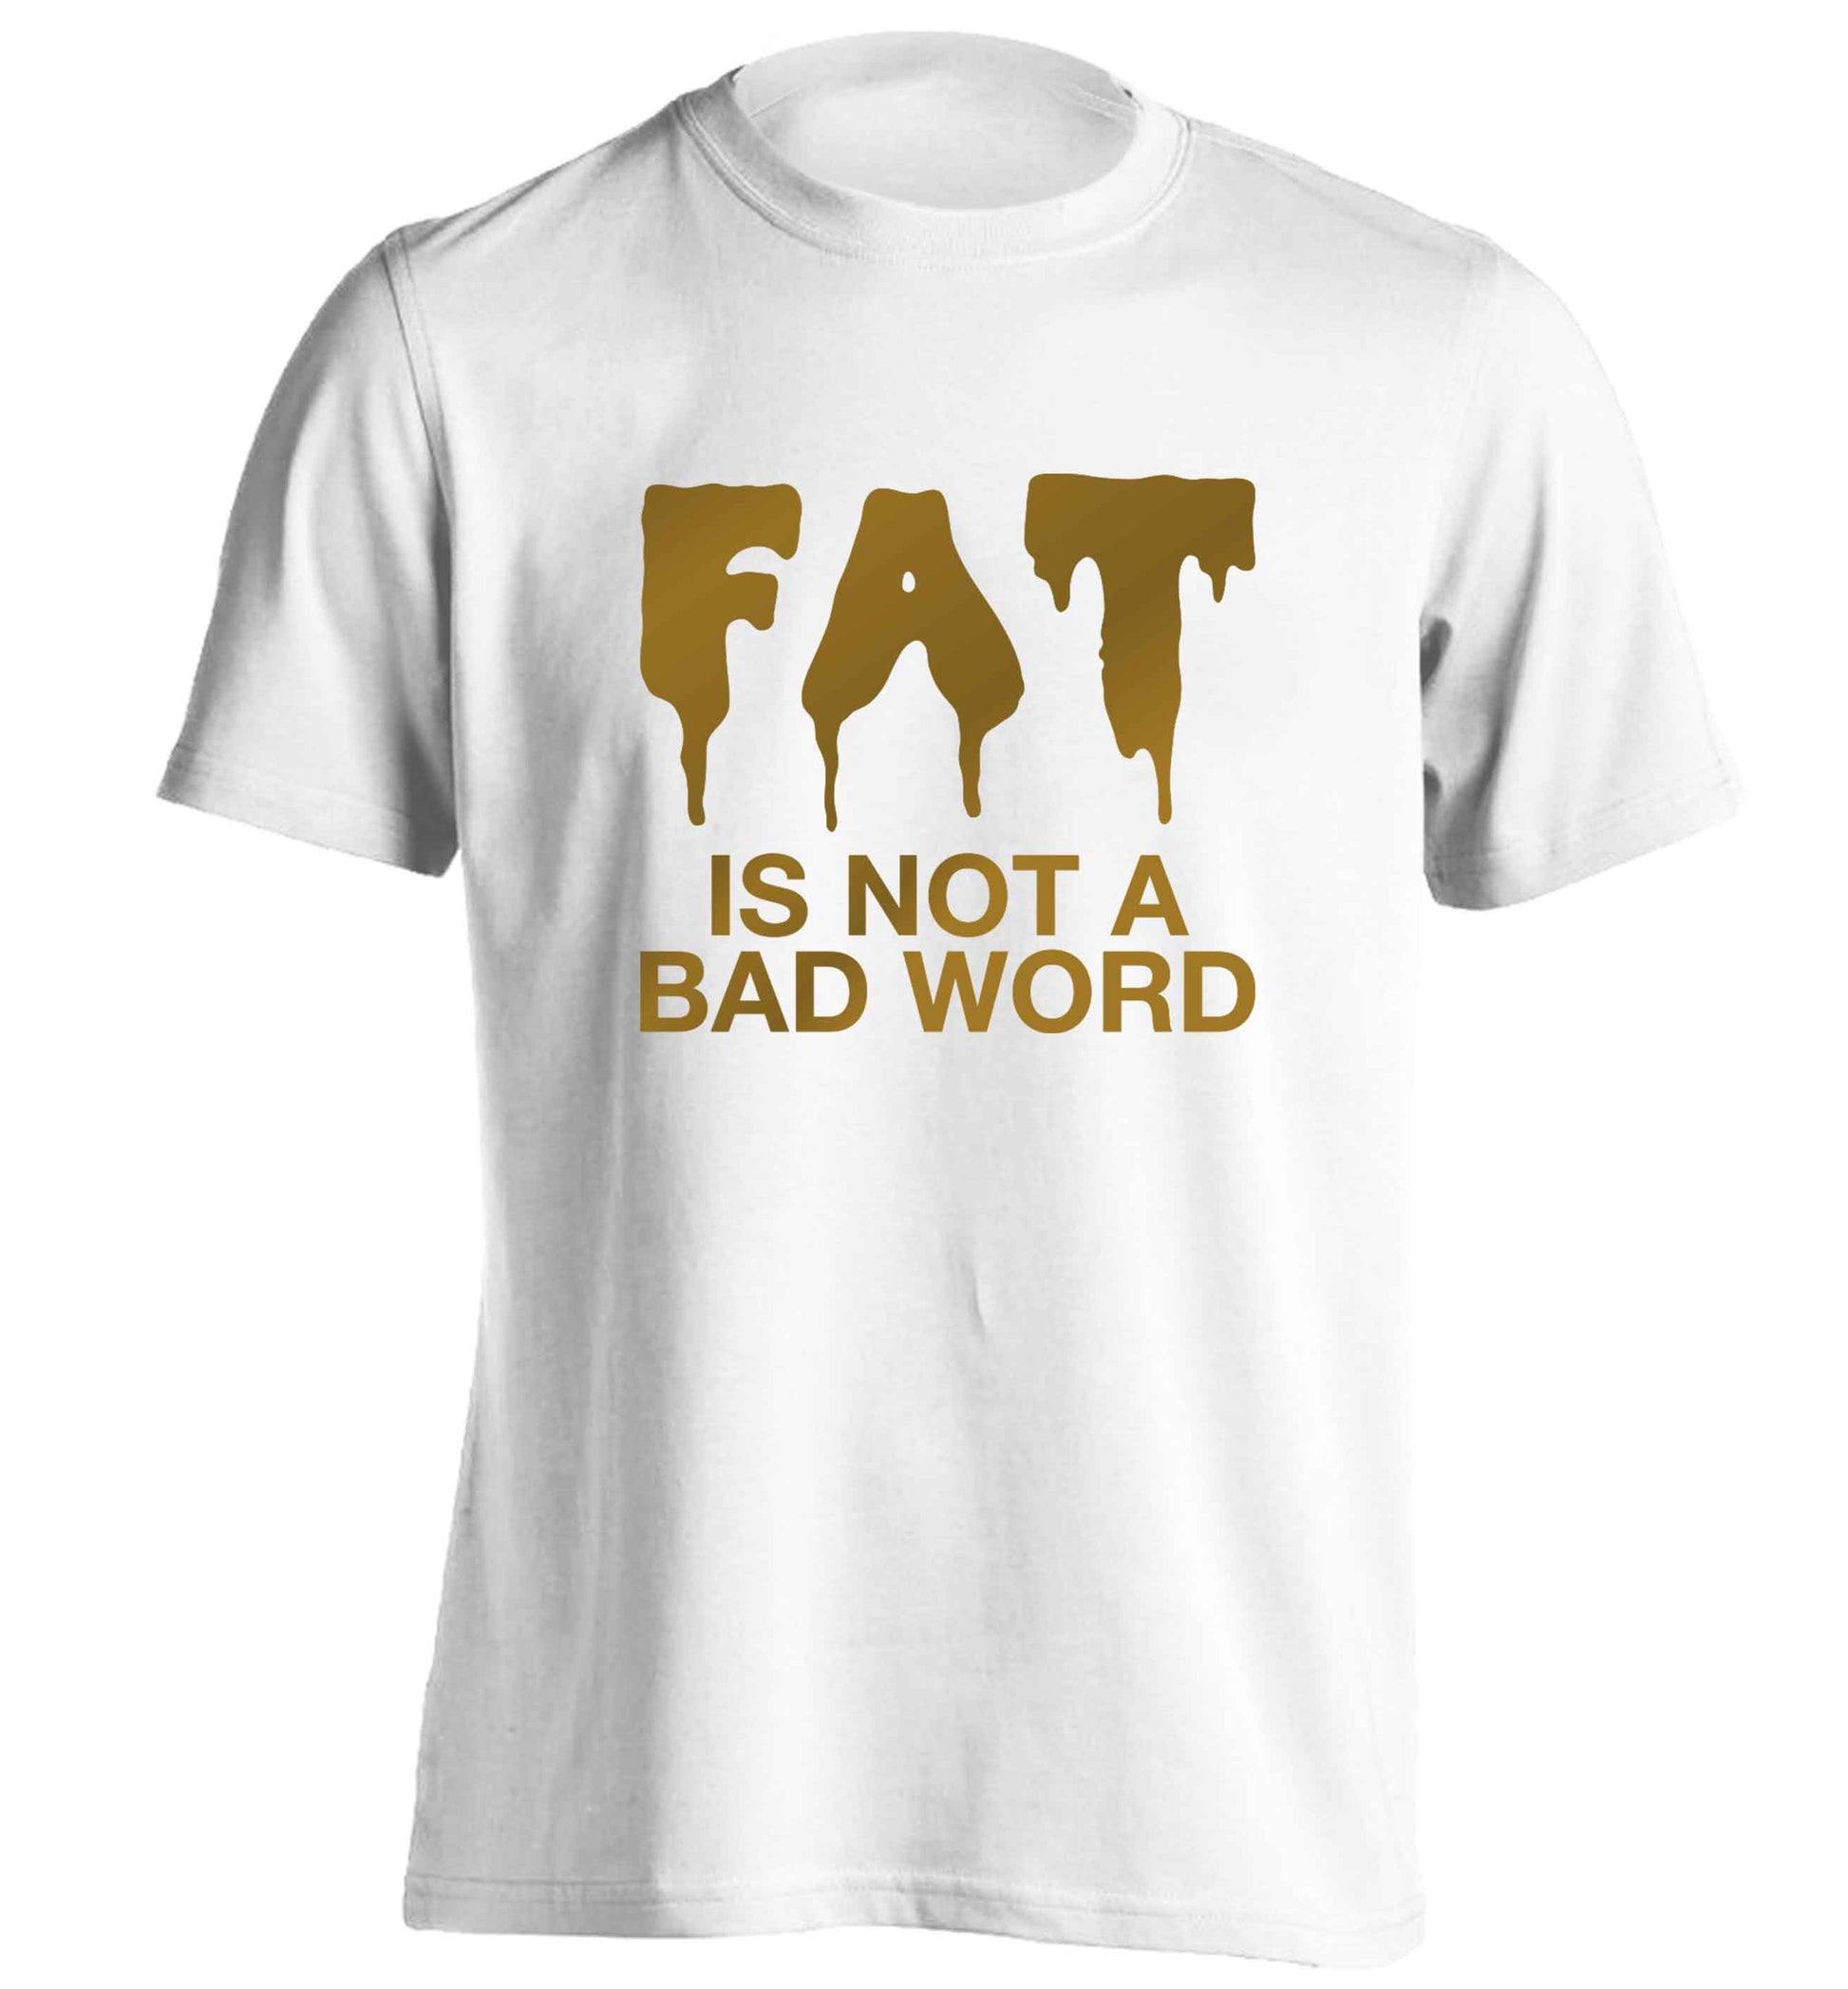 Fat is not a bad word adults unisex white Tshirt 2XL